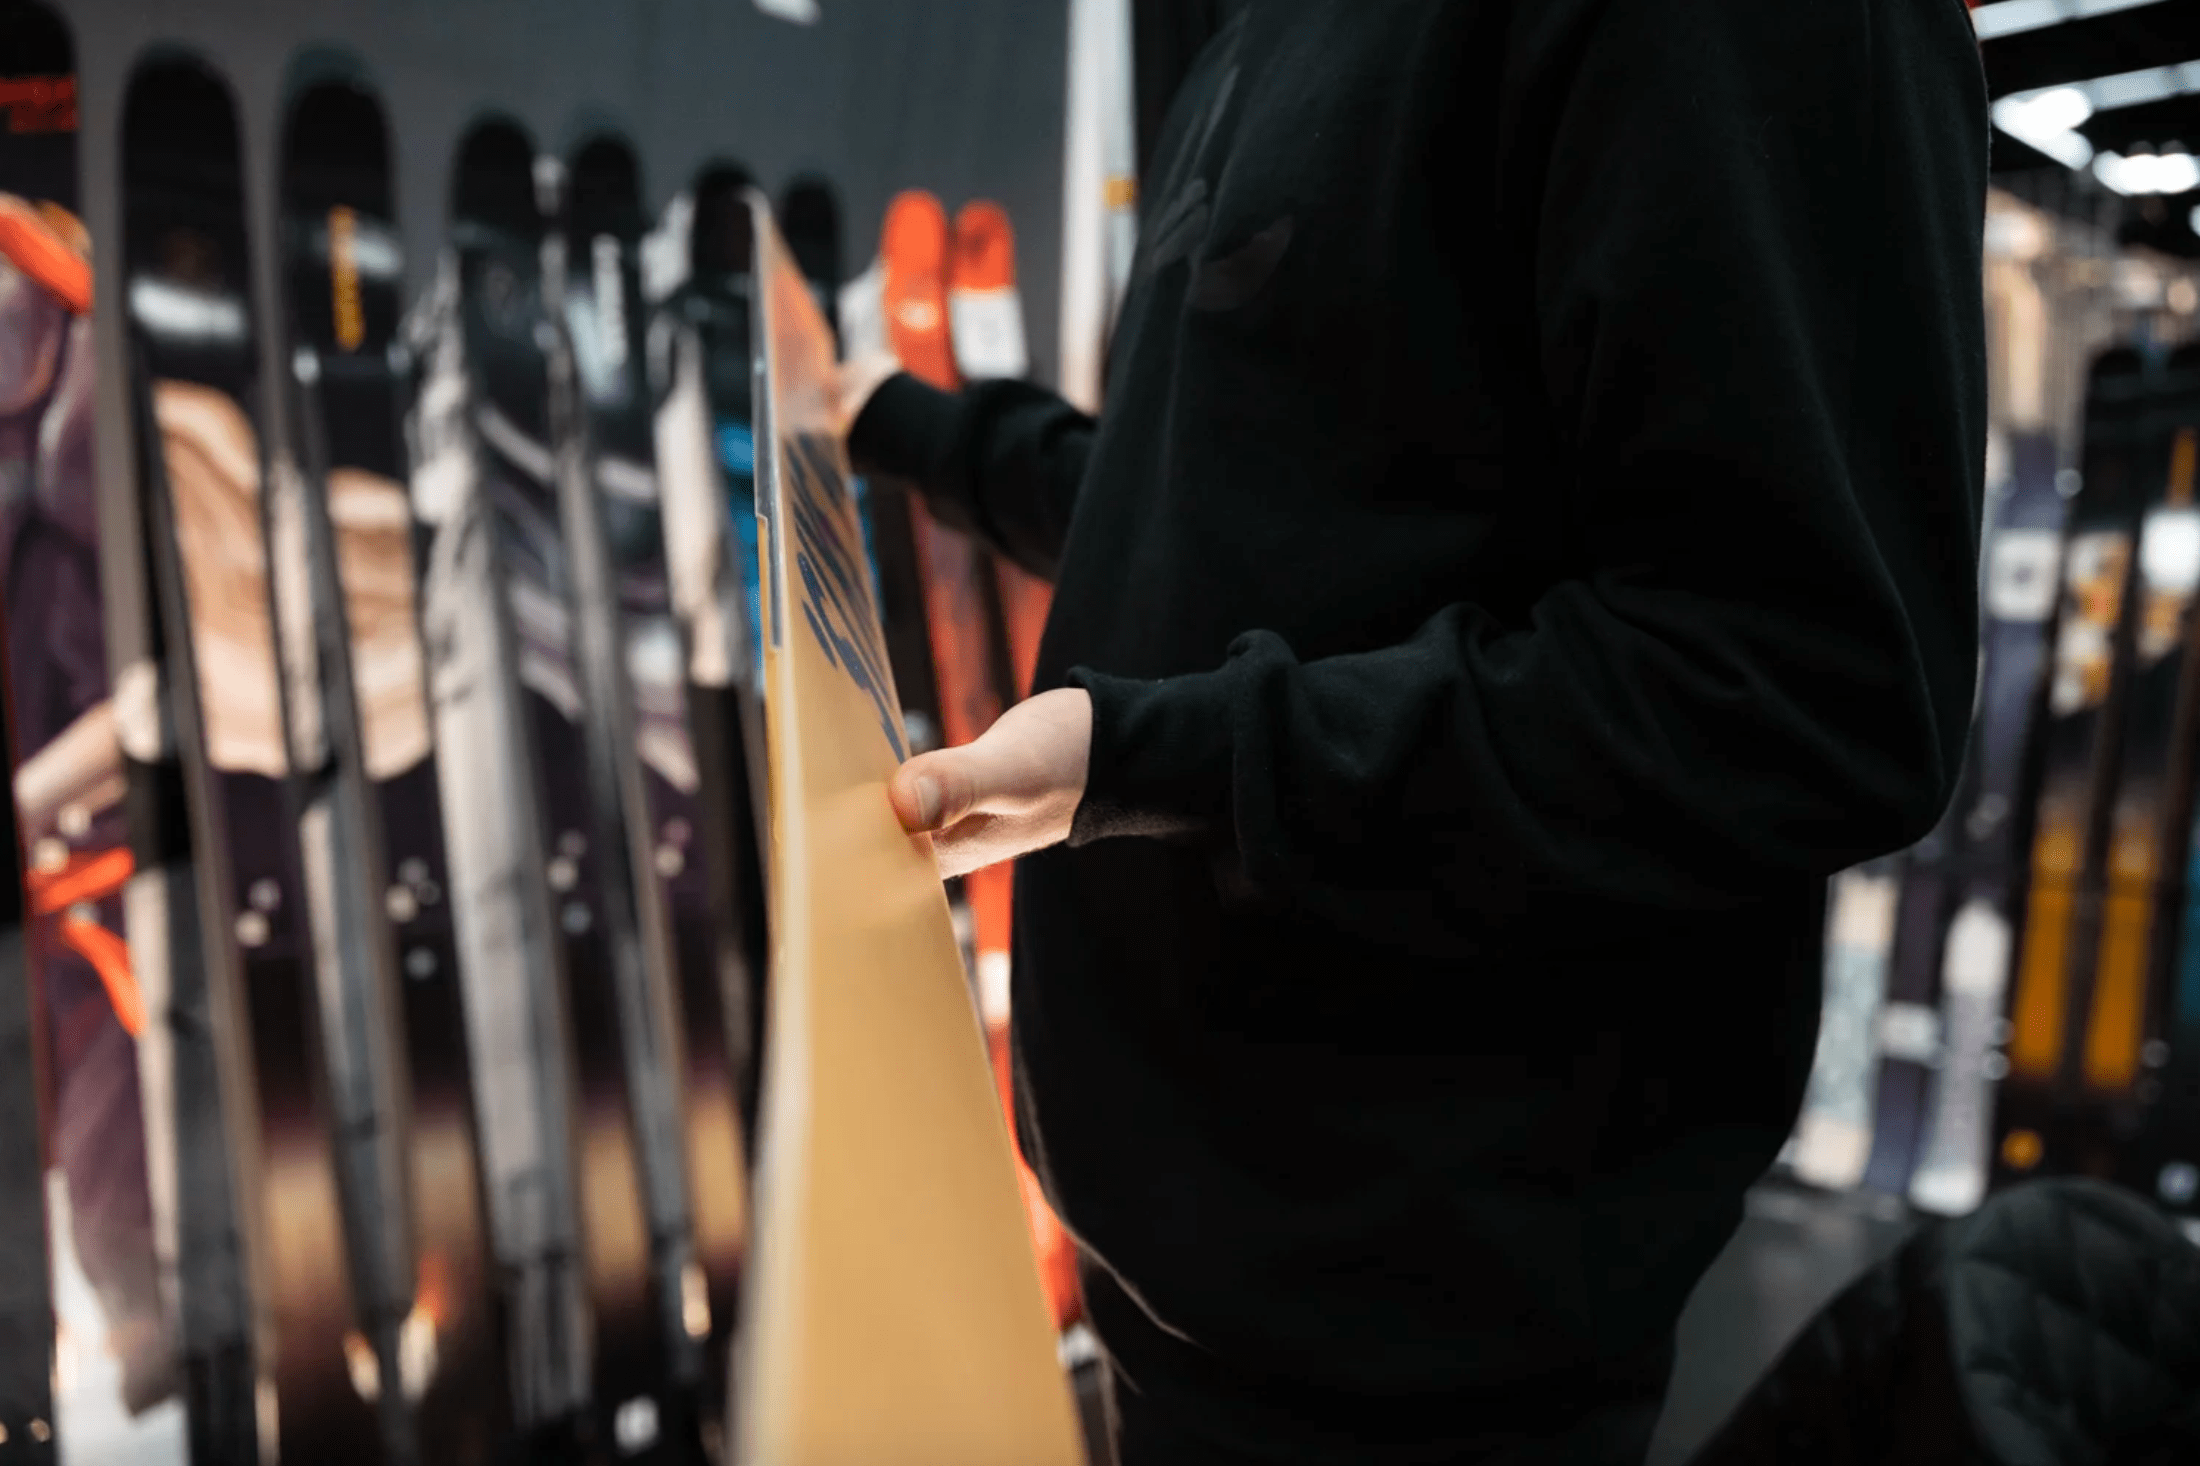 Armada is shaking up skis in 2020 with their new "edgeless" park skis, specifically for use on rails and non-snow materials.